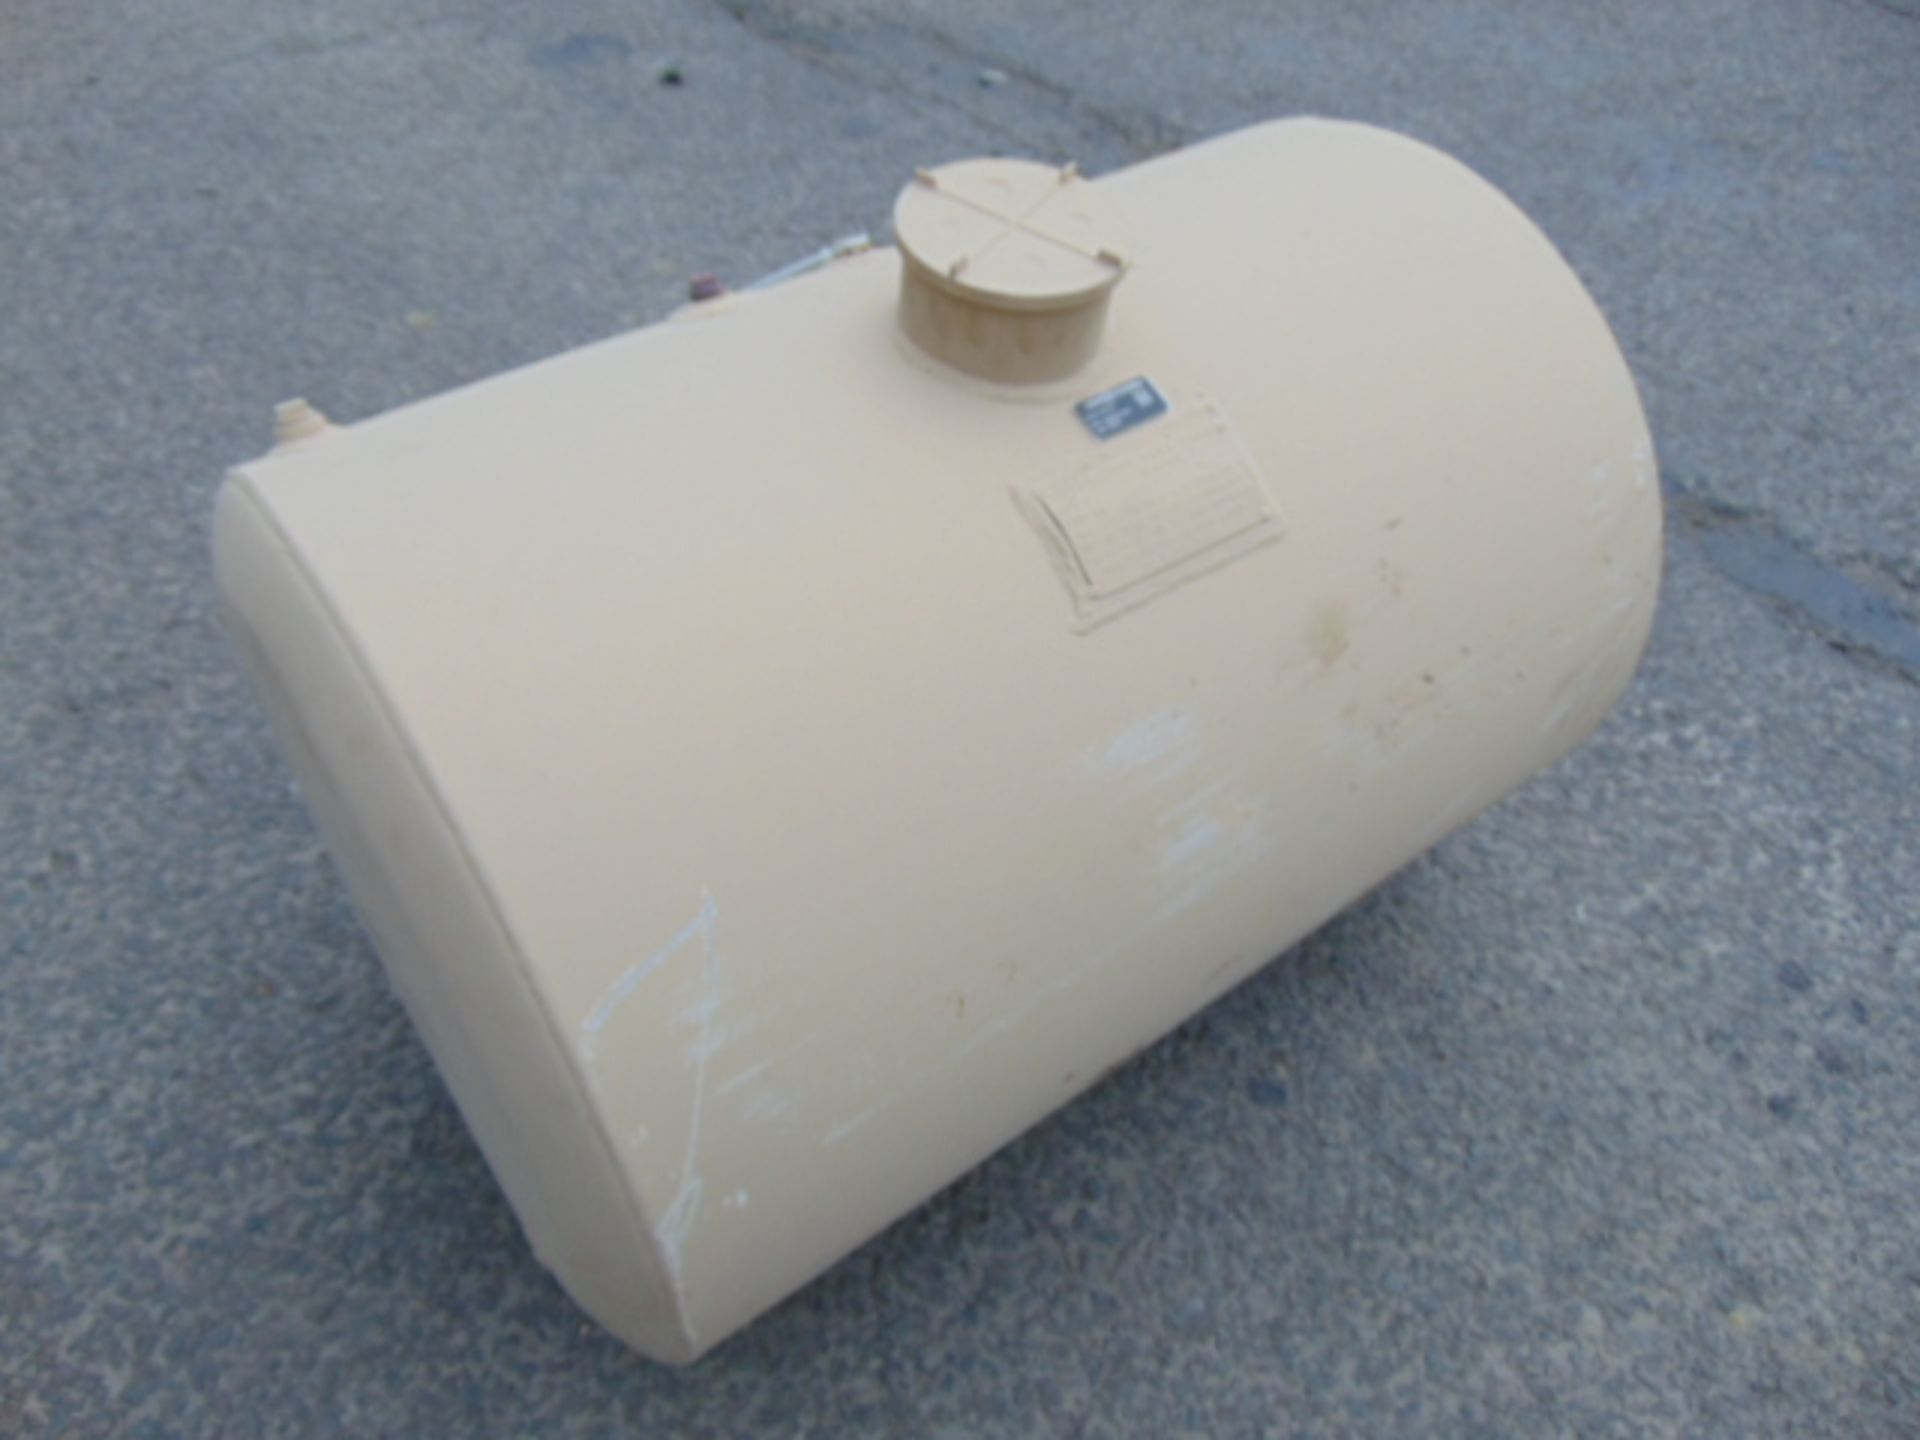 6 x Unissued Heavy Duty 51 US gall Automotive Fuel Tanks - Image 2 of 6